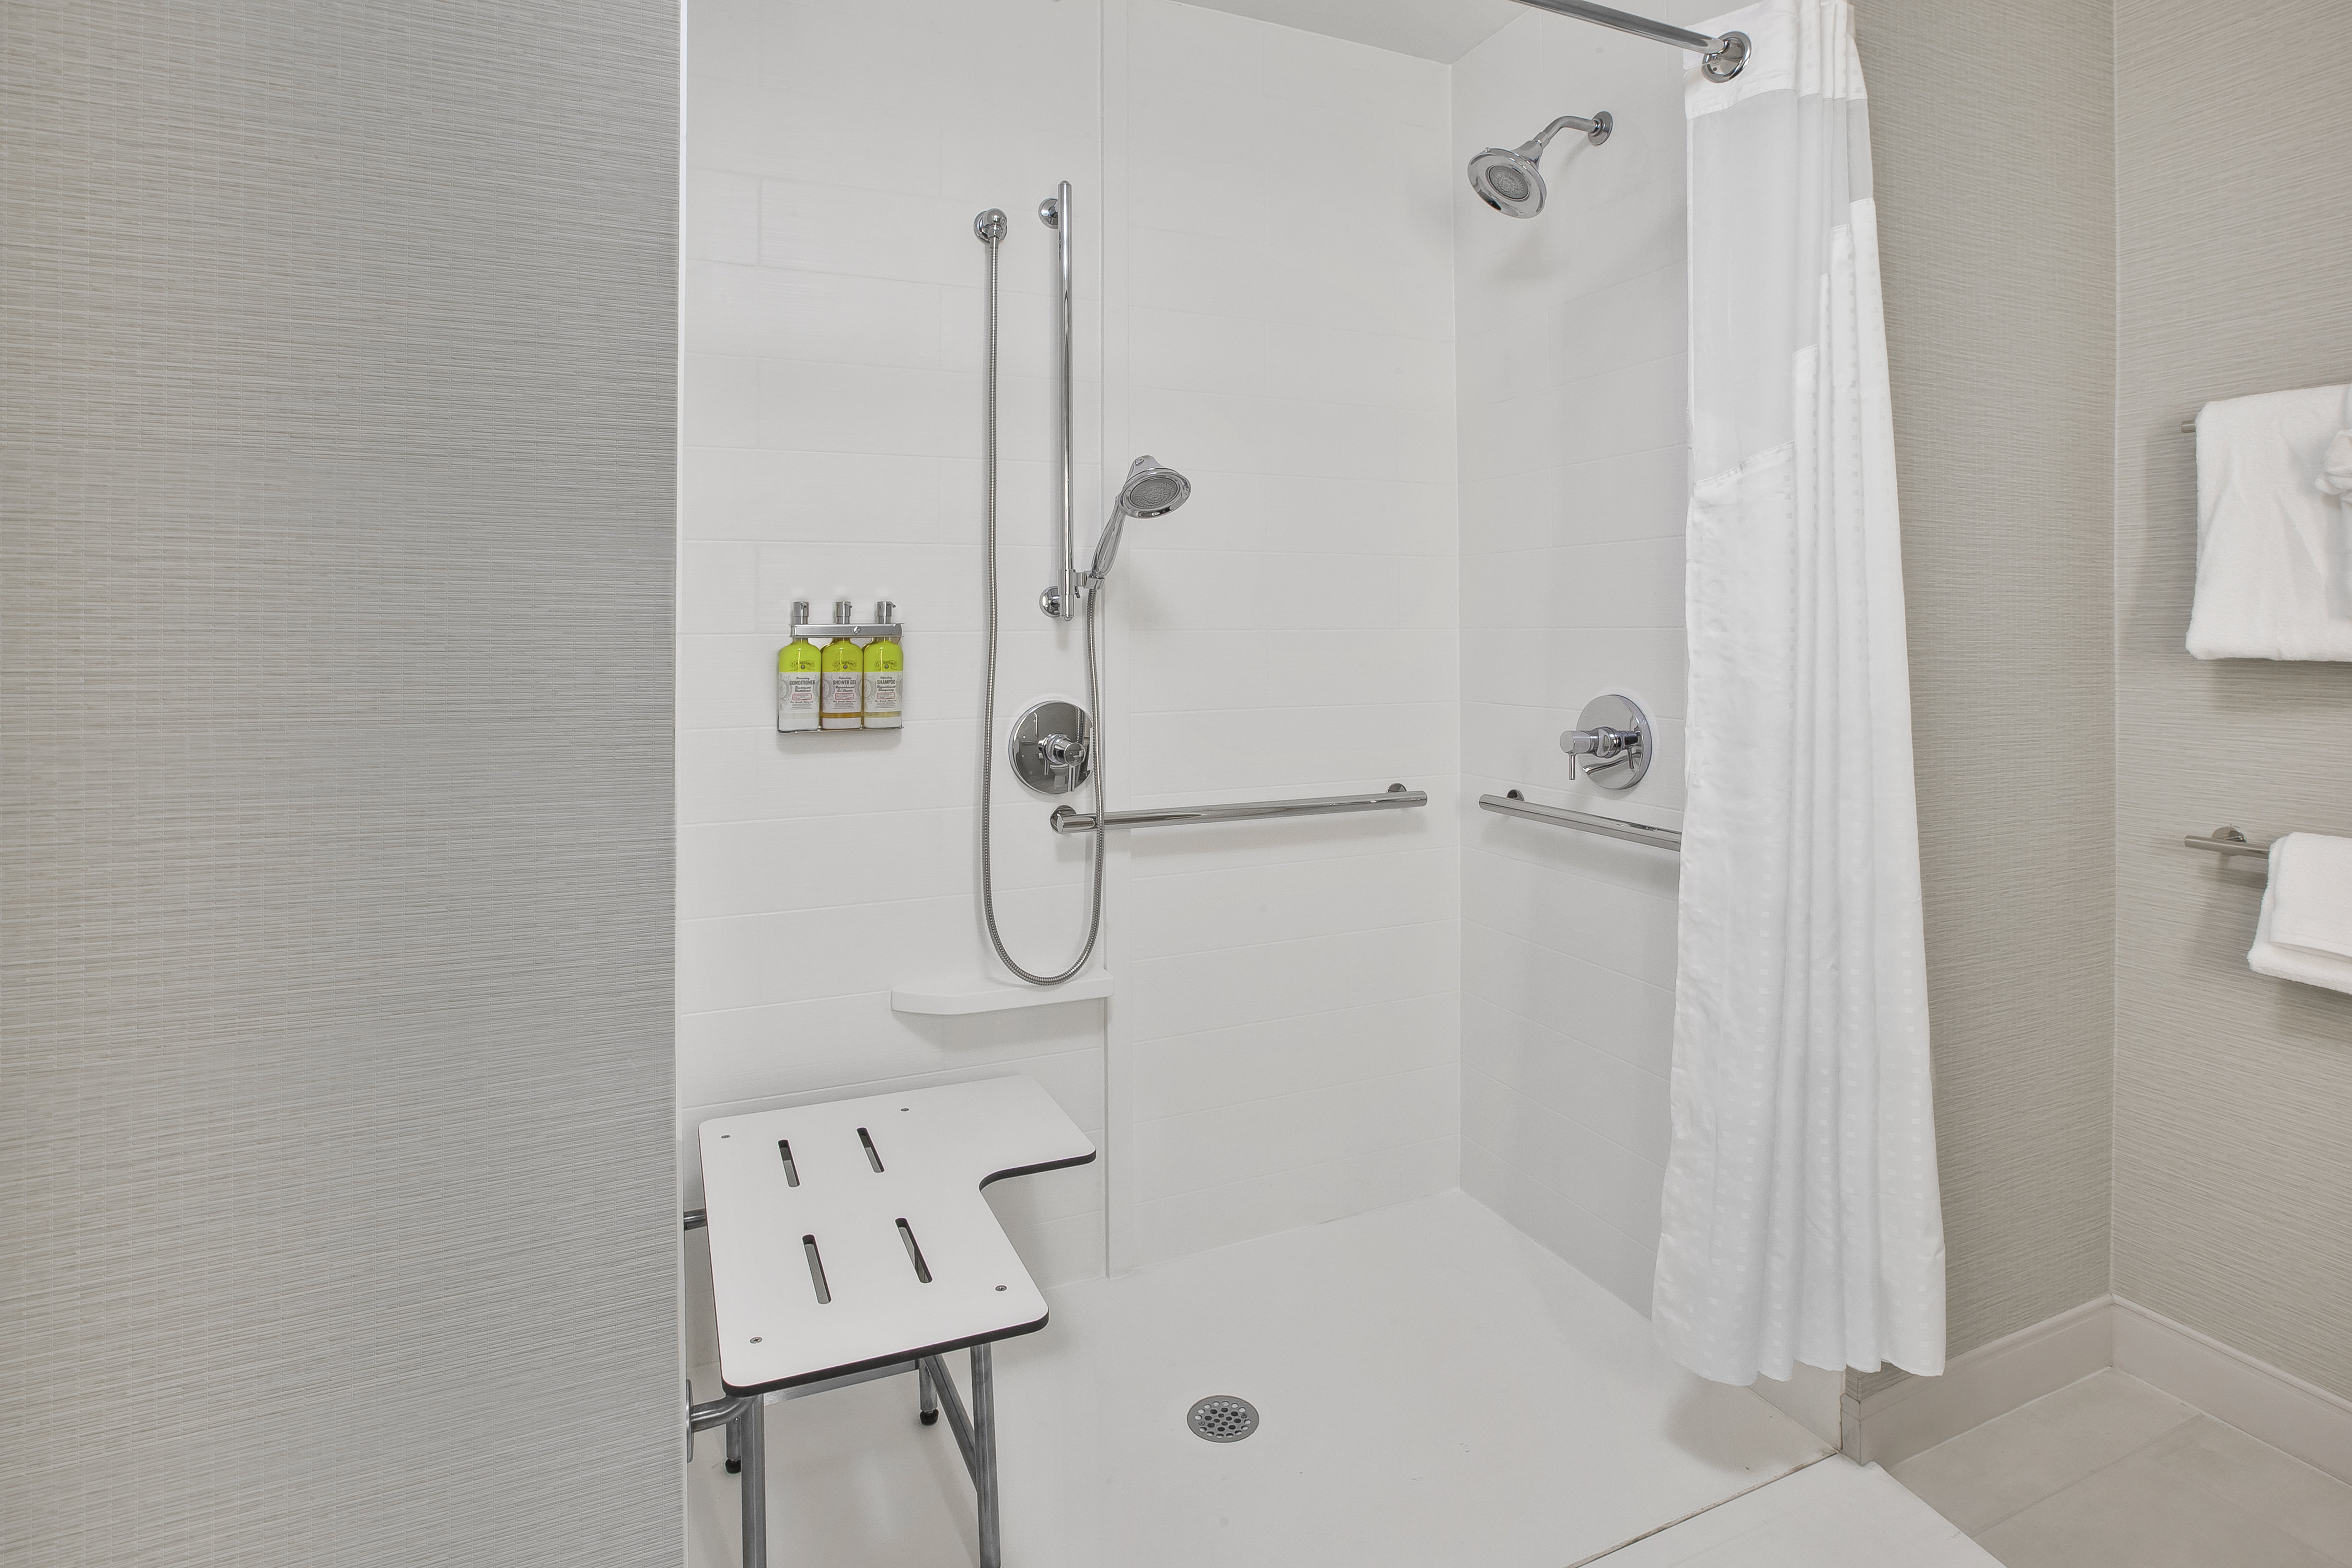 Accessible bathroom with a roll-in shower.